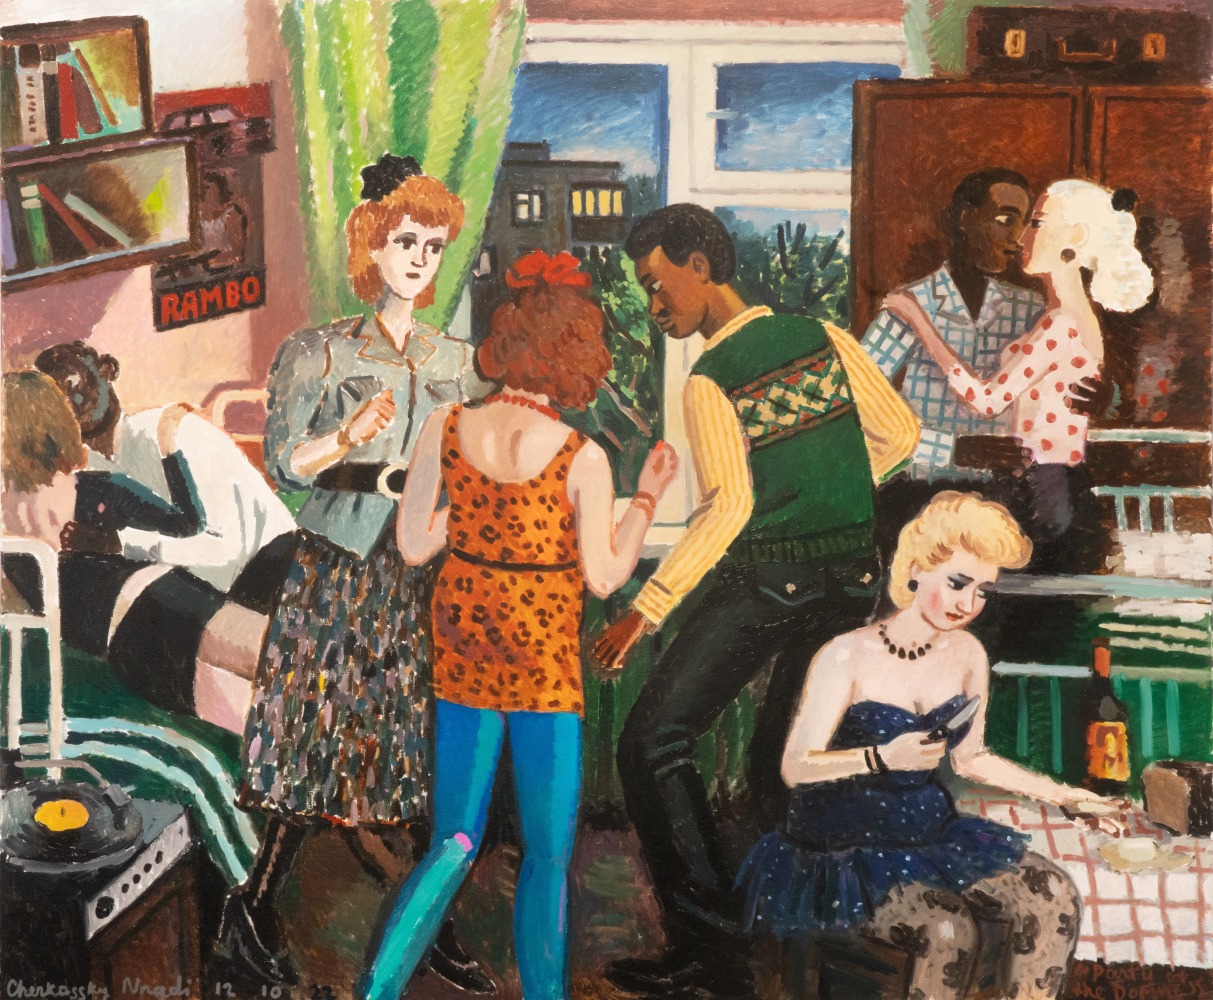 A painting of a party scene in a small room with young people